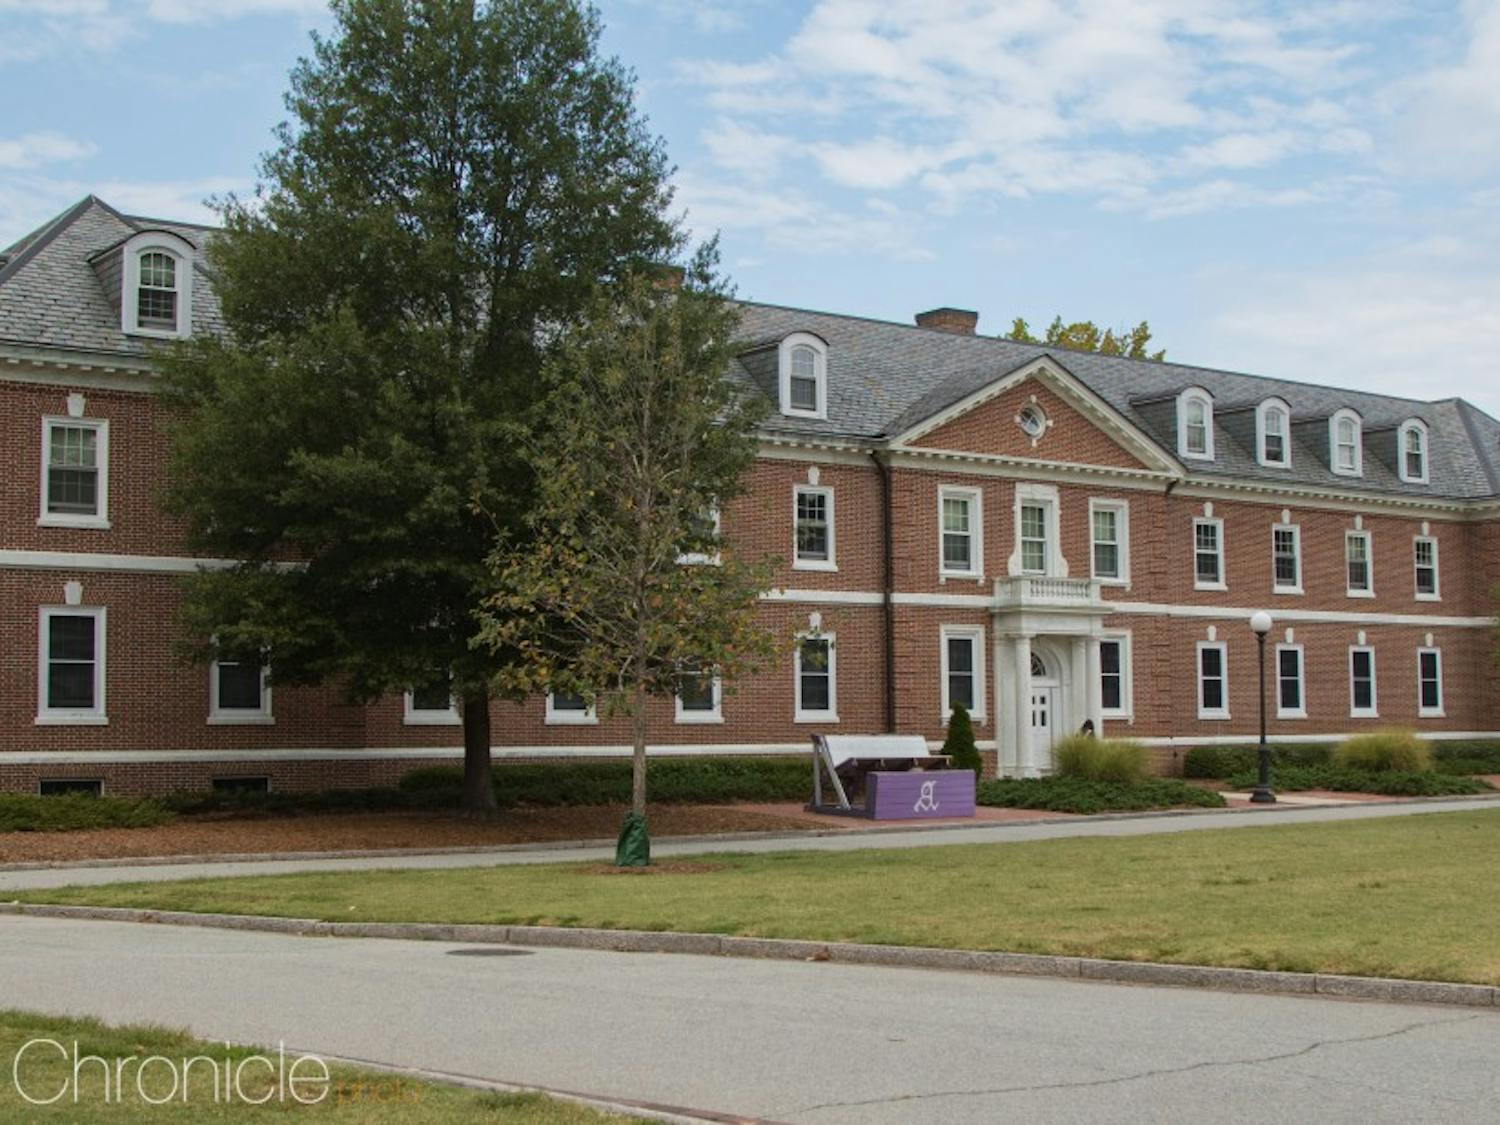 First-years are randomly assigned into houses on East Campus and now have the option of linking with their dorm into a section on West Campus.